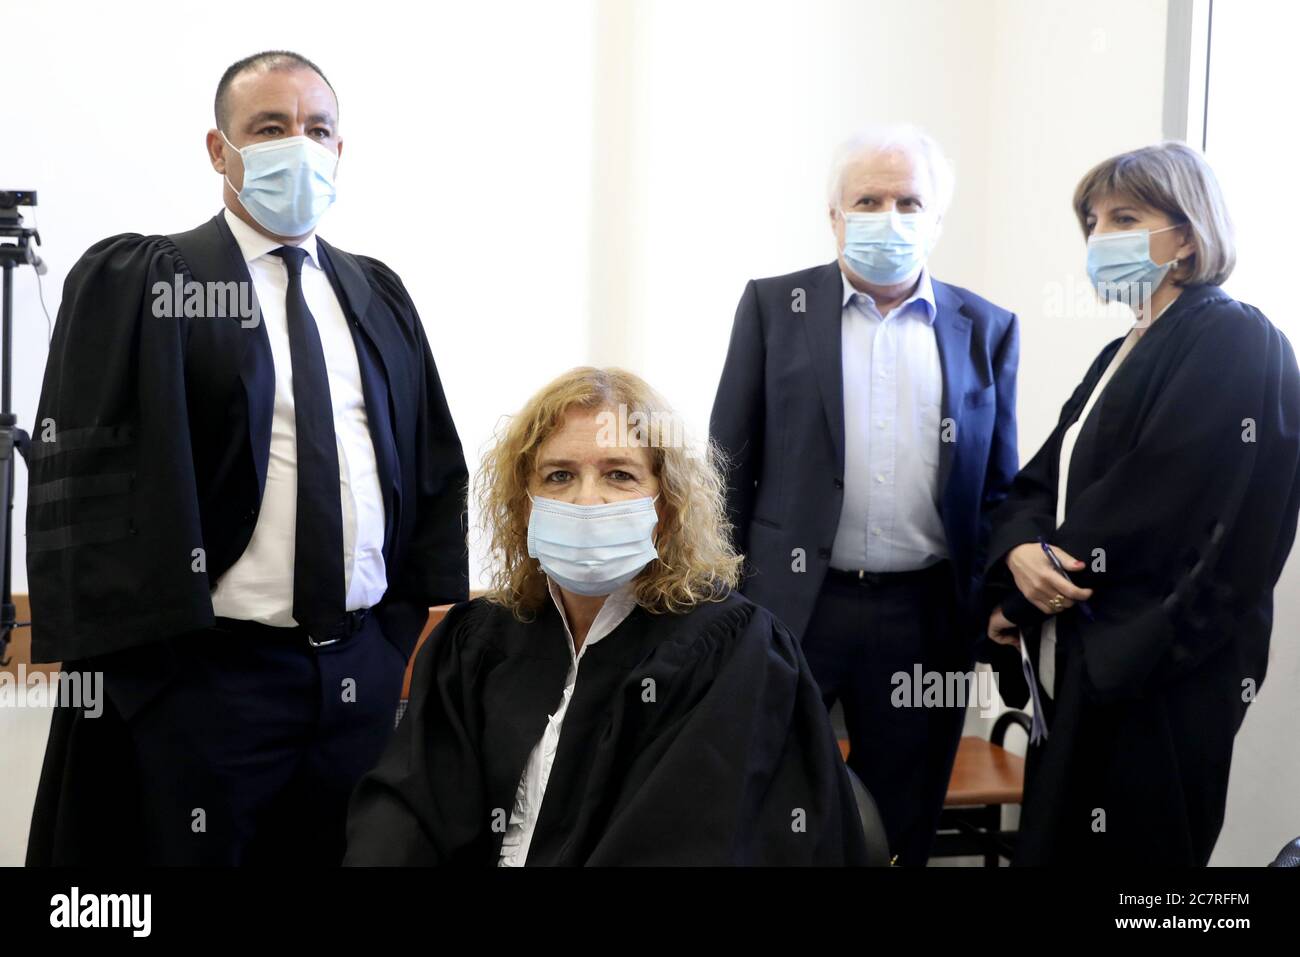 Jerusalem, Israel. 19th July, 2020. Liat Ben Ari, plaintiff in the trial against Prime Minister Benjamin Netanyahu, is seen at District Court in Jerusalem, Israel, ahead of the hearing on Sunday, July 19, 2020. Netanyahu has been charged with counts of bribery, fraud and breach of trust, becoming the first Israeli leader to be tried for alleged corruption while still in office. Pool Photo by Marc Israel/UPI Credit: UPI/Alamy Live News Stock Photo